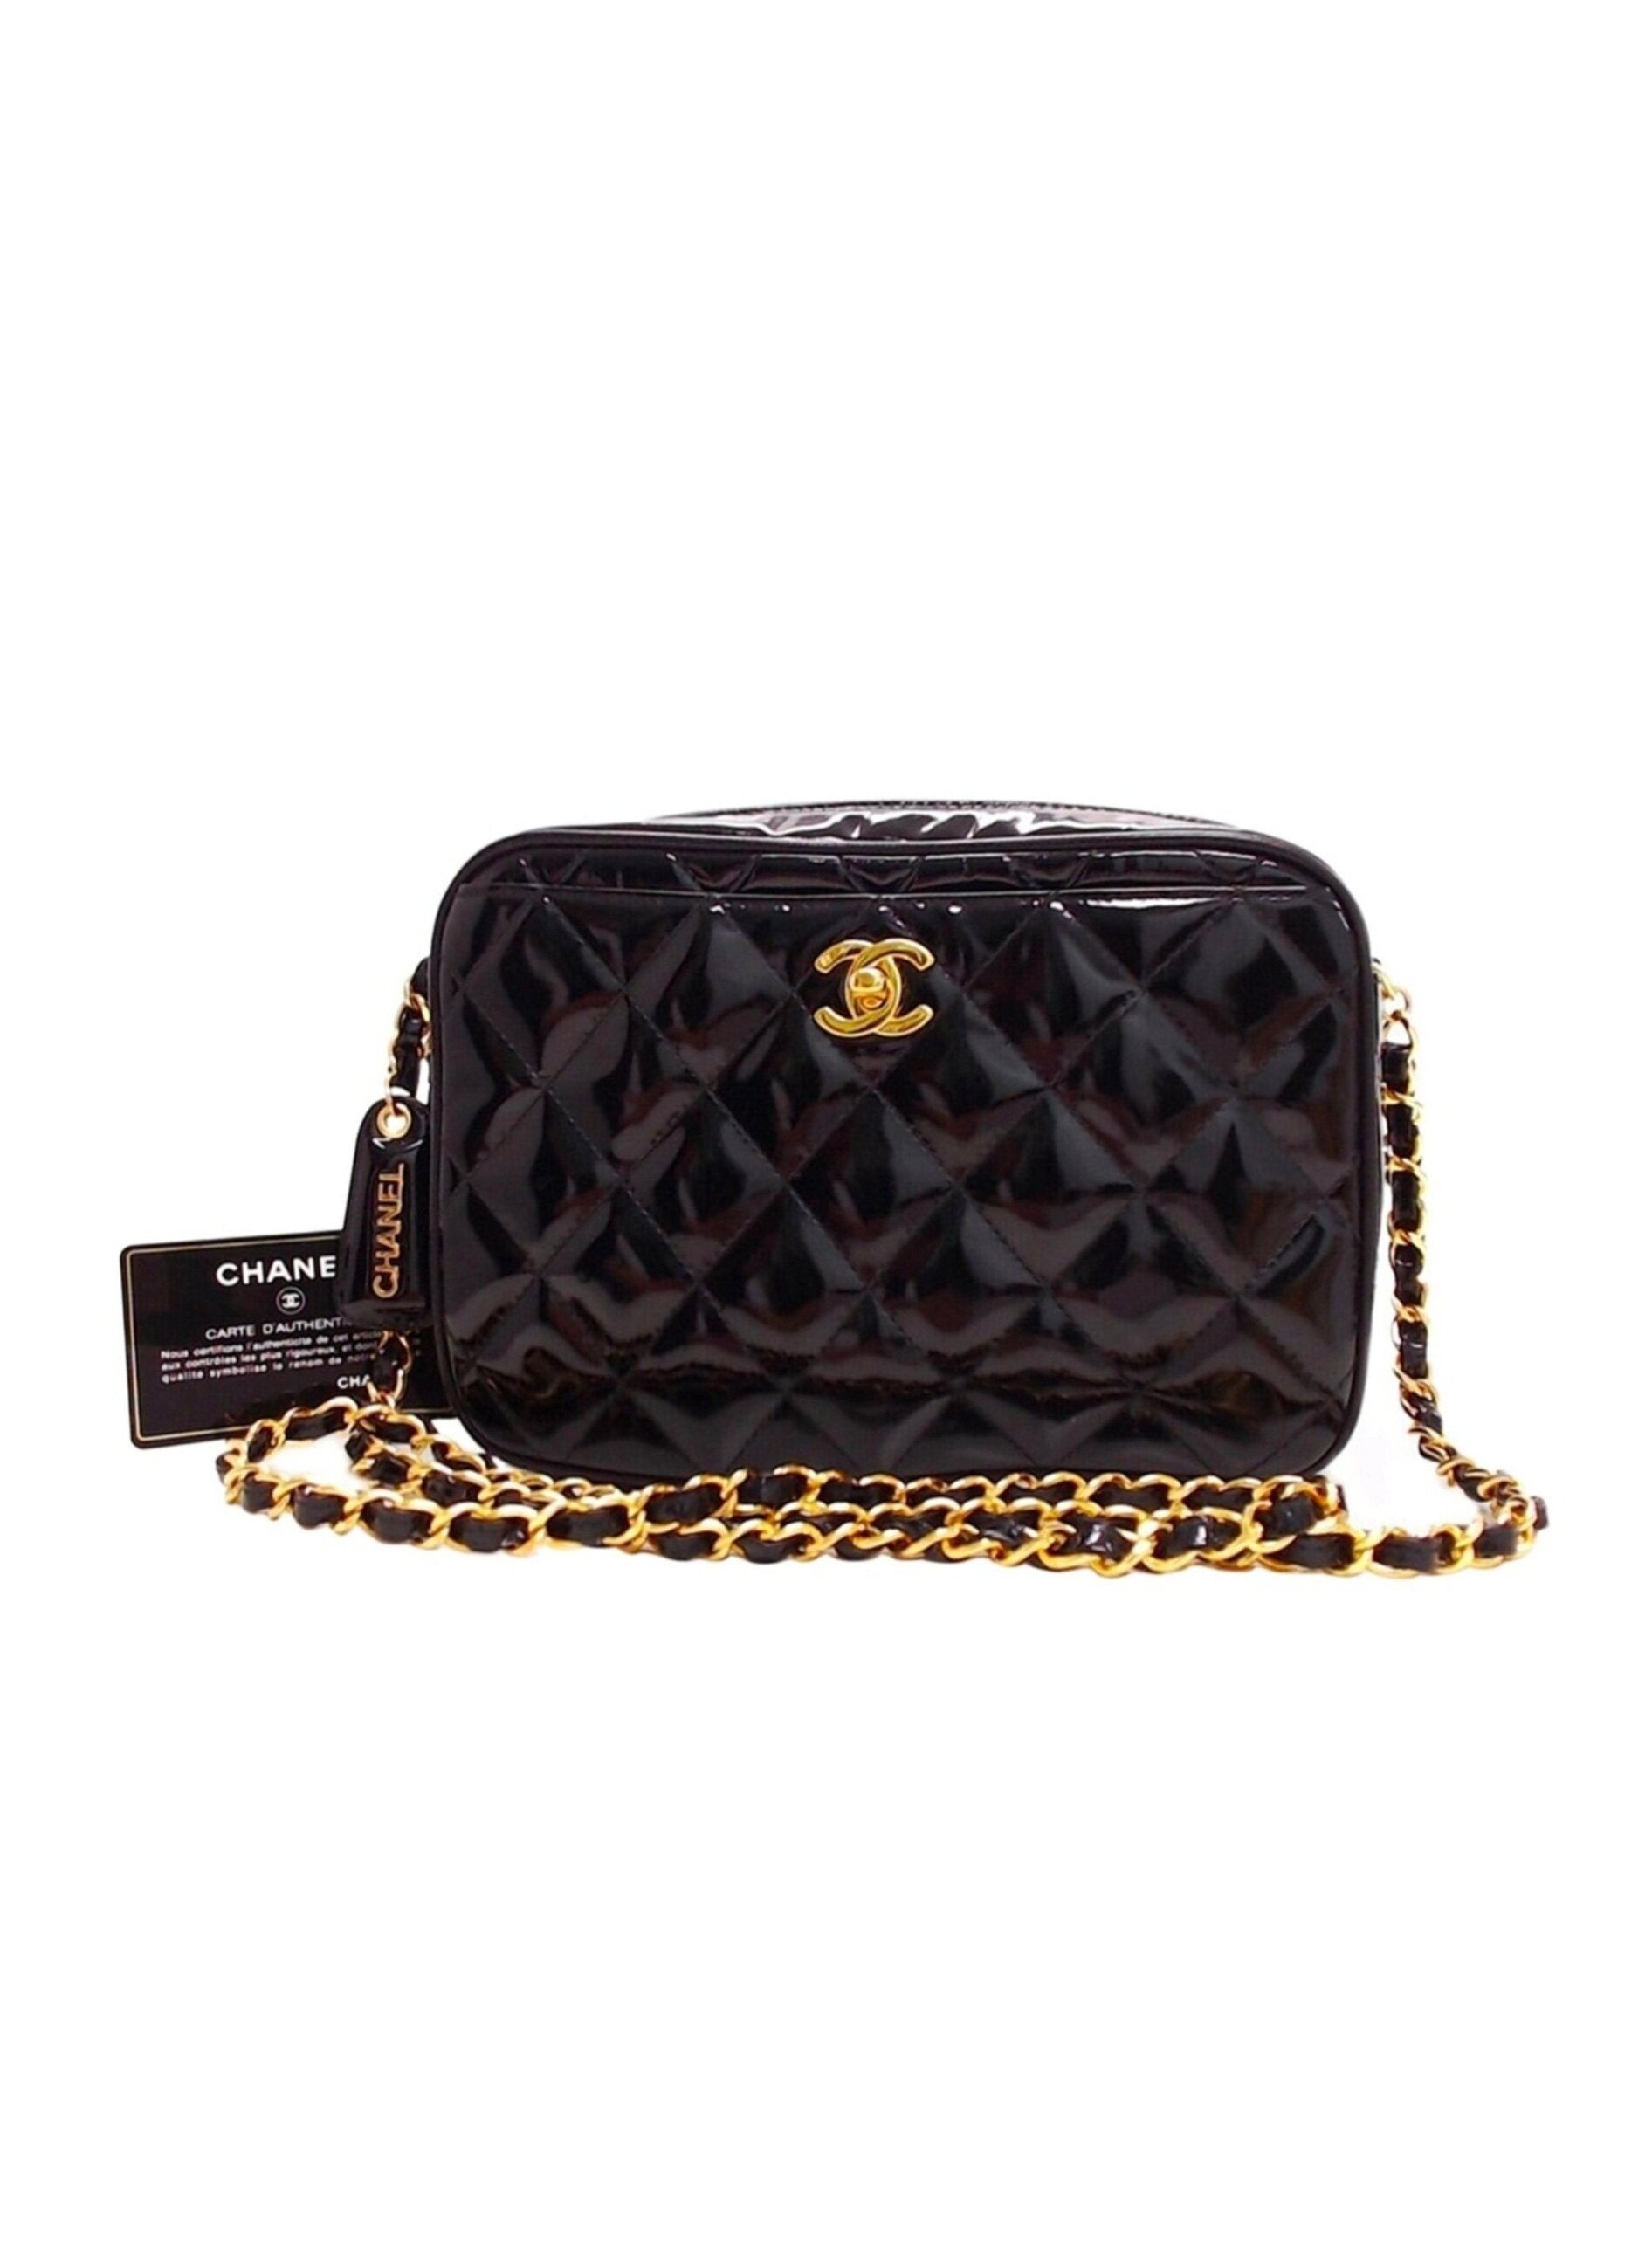 Chanel 2000s Rare Quilted Patent Camera Black Bag · INTO